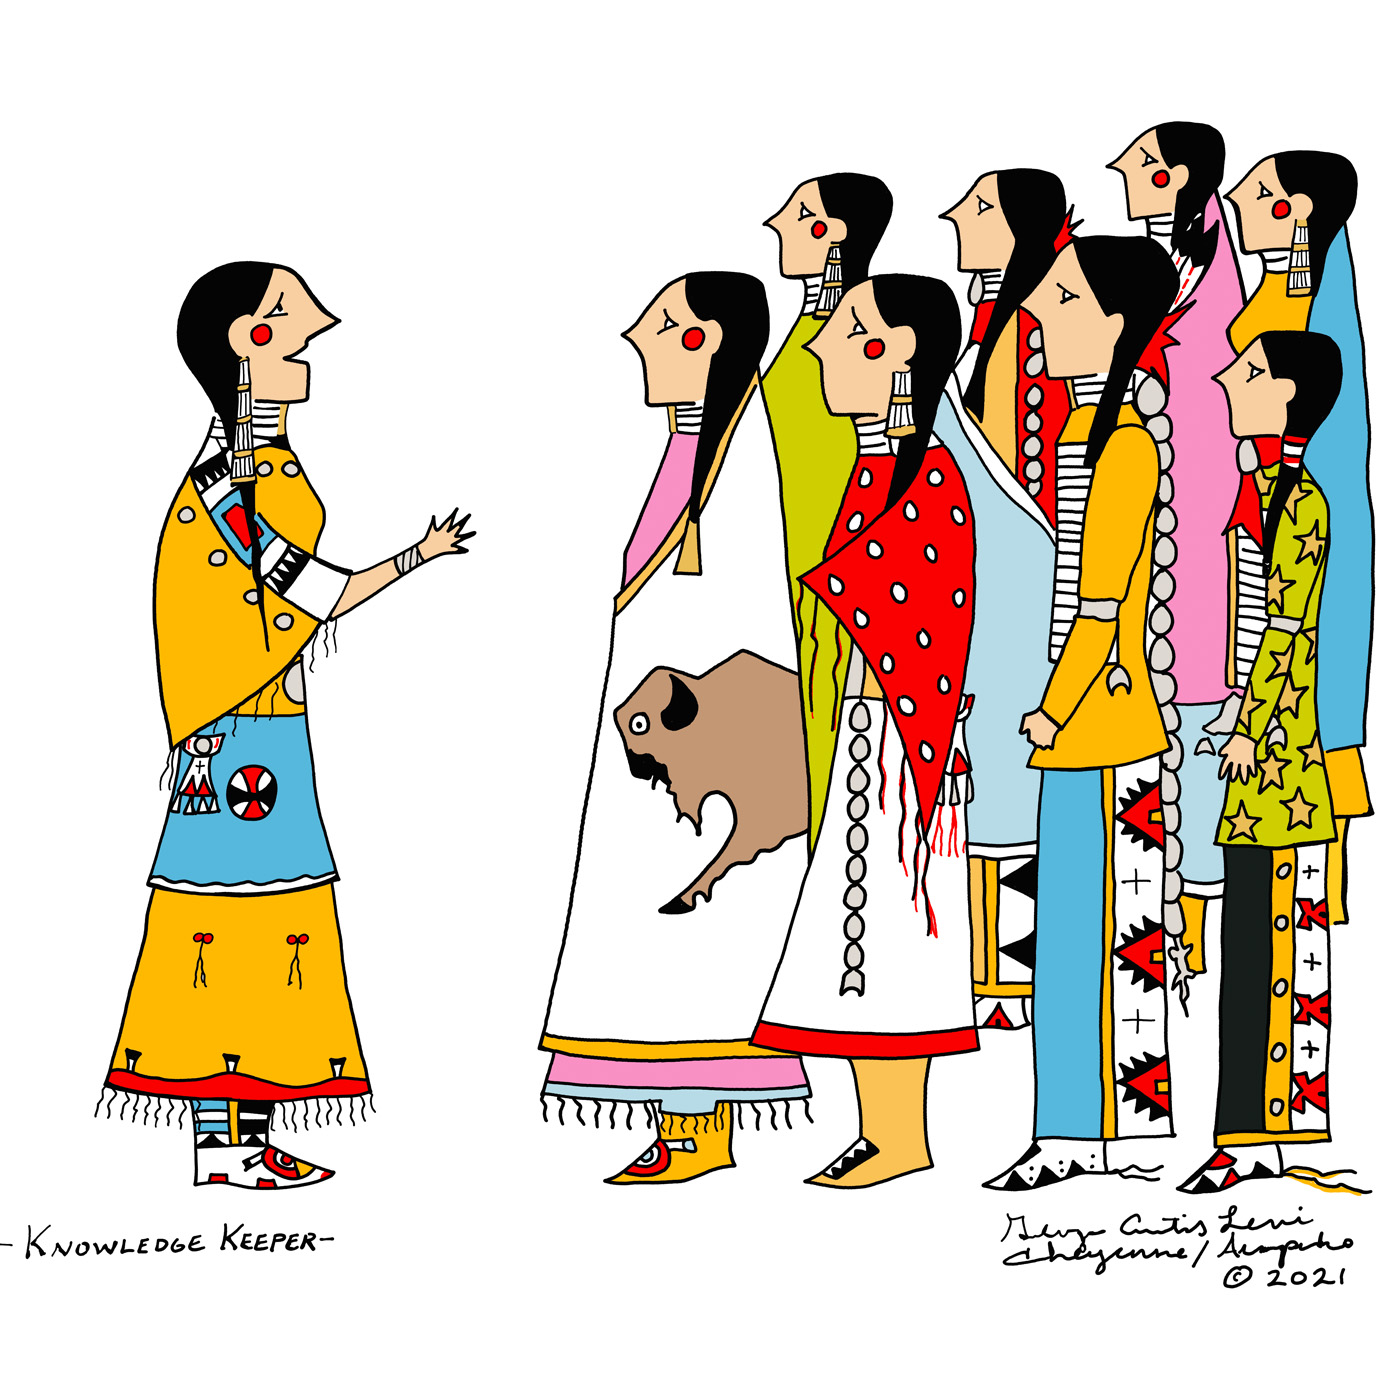 Original artwork by George Curtis Levi entitled ‘Knowledge Keeper’. The drawing depicts a figure addressing a group of people in their community. Everyone is wearing bright clothing in yellow, blue, red, green and pink.